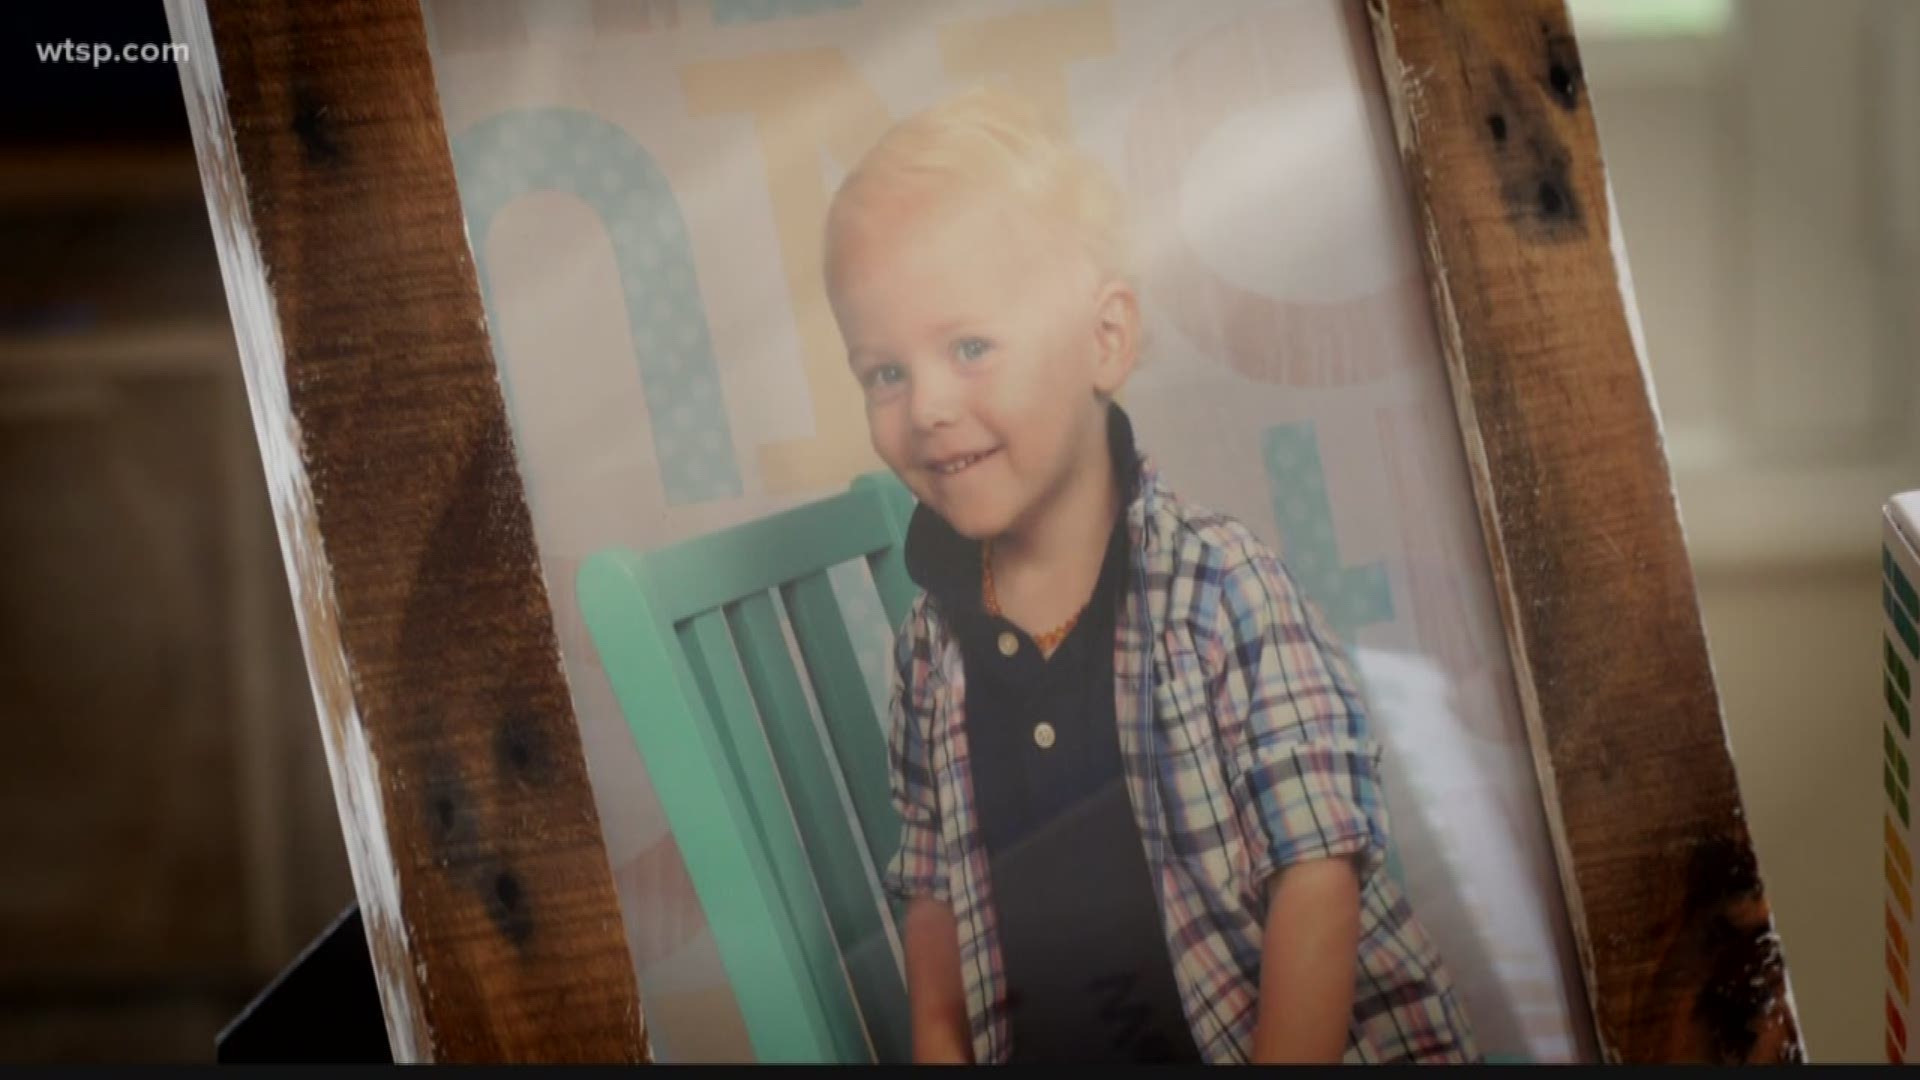 A Tampa Bay mother says the death of her child is bringing about change. 

Meghan DeLong’s son Conner was killed after his bedroom dresser tipped over and crushed him. It was Mother’s Day 2017. 

DeLong co-founded Parents Against Tip-Overs, or PAT, after finding out she was not alone in losing a child to furniture falling.